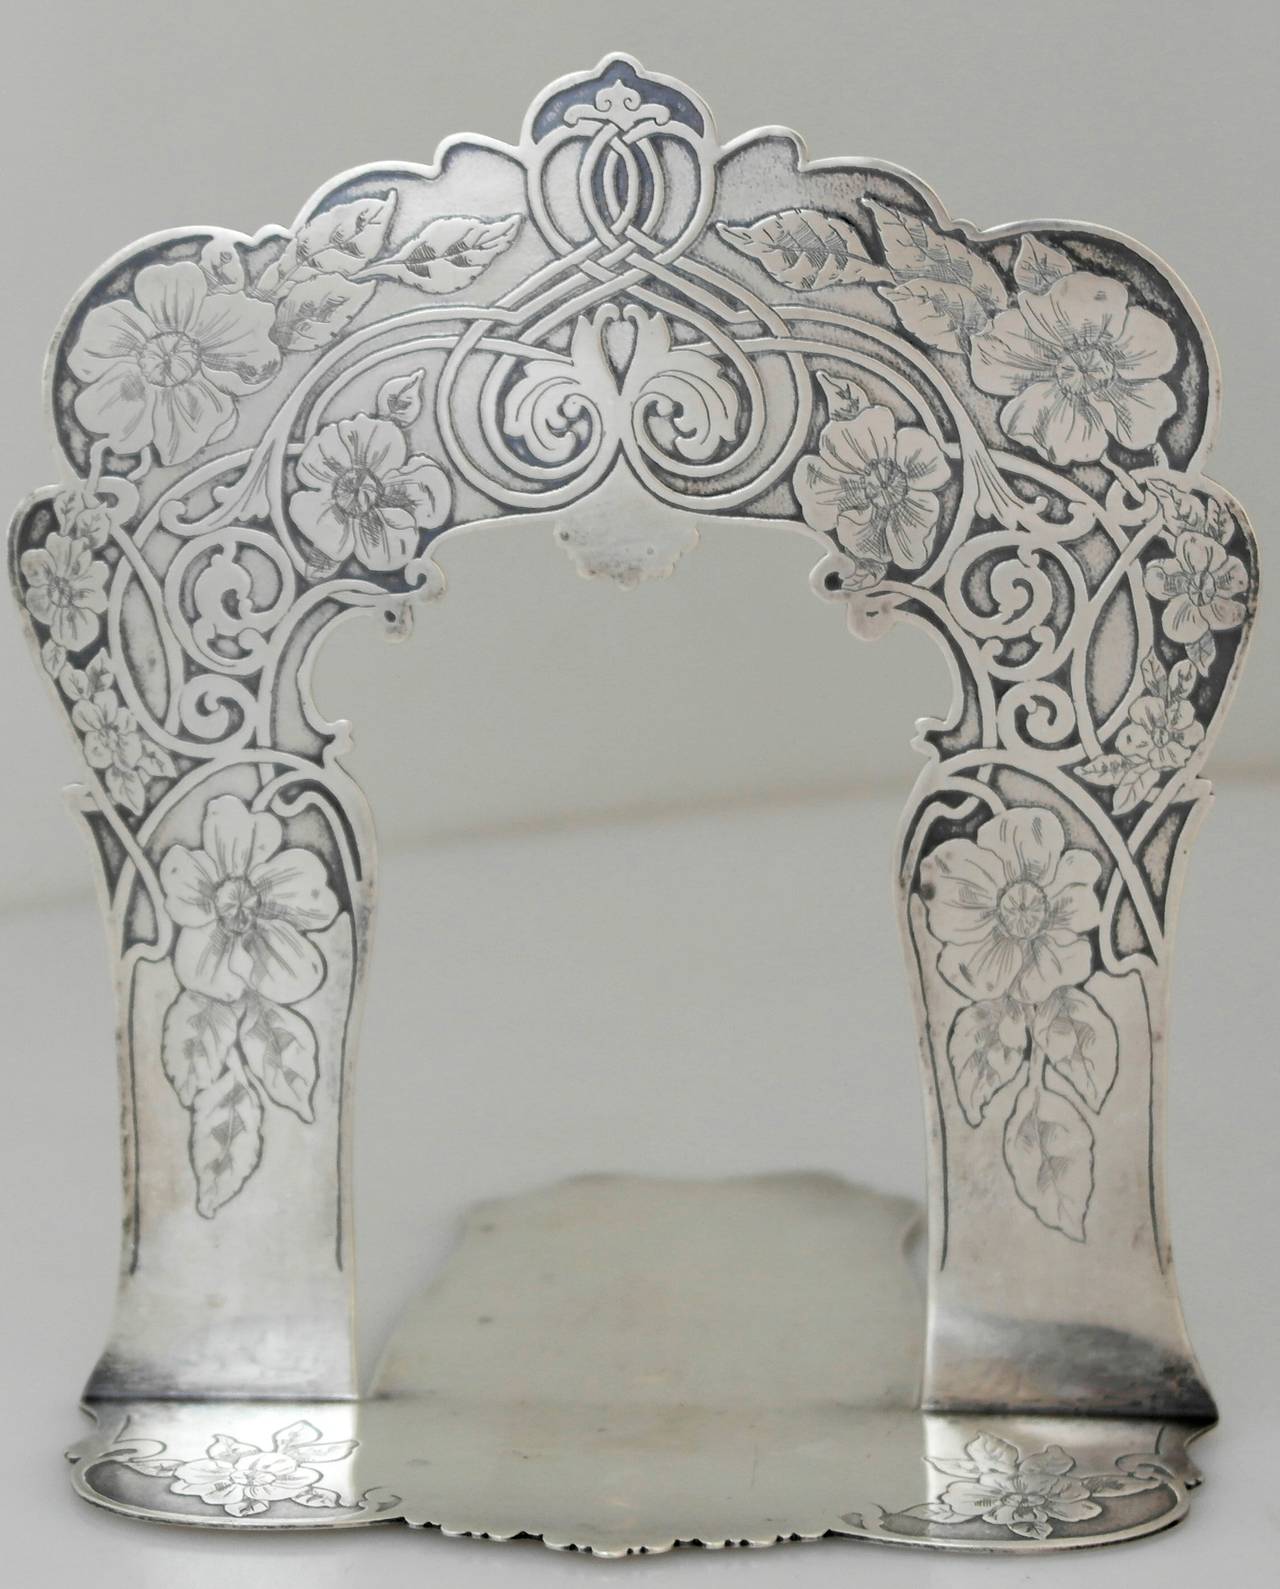 Being offered is a pair of circa 1905 sterling silver bookends by Tiffany & Co. of New York. Scarce pair of bookends made during the directorship of Charles T. Cook; with a masterful acid-etched floral and scroll design. Dimensions: 6